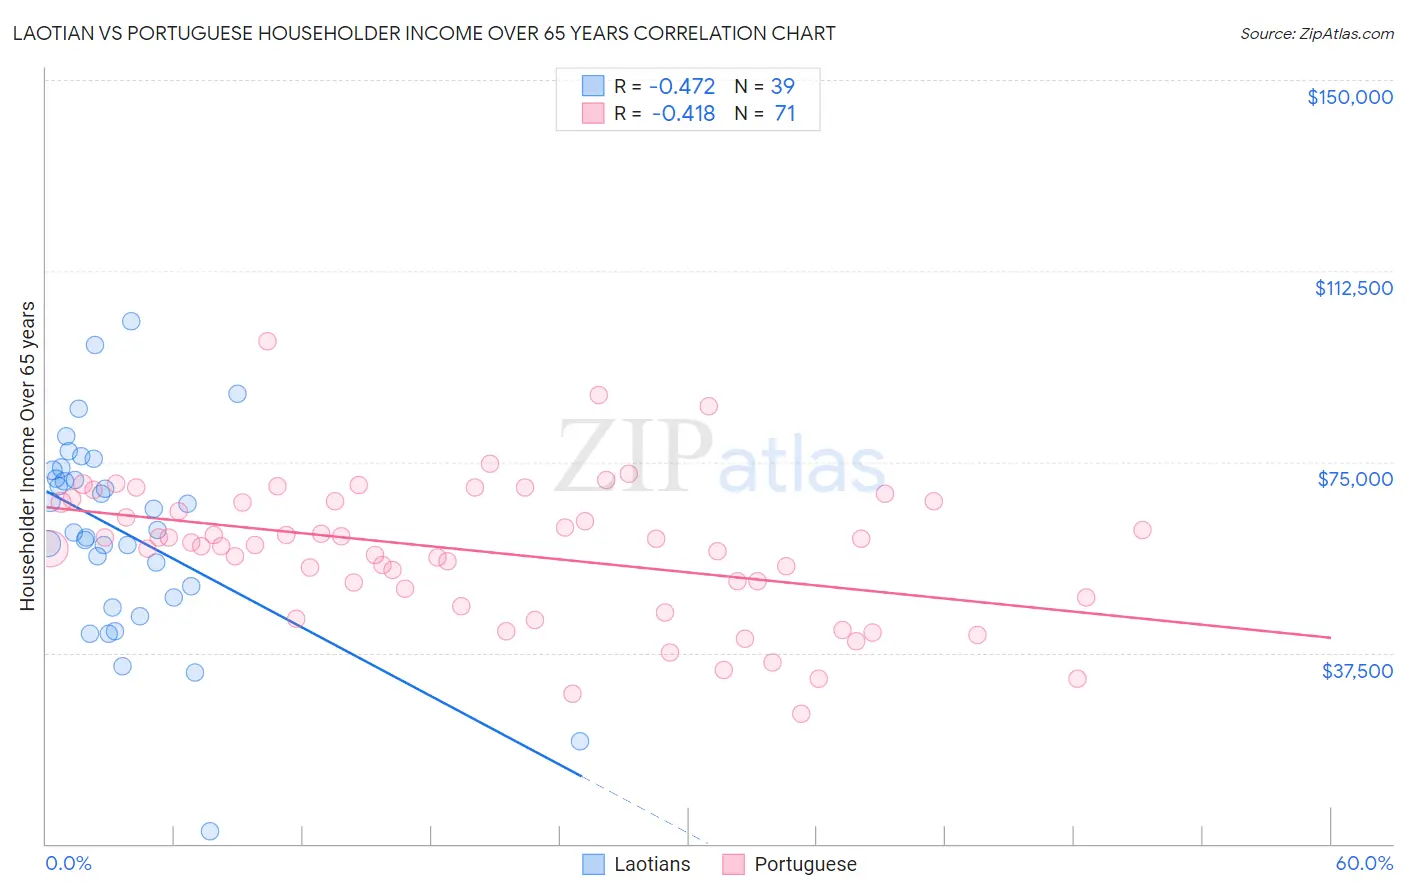 Laotian vs Portuguese Householder Income Over 65 years